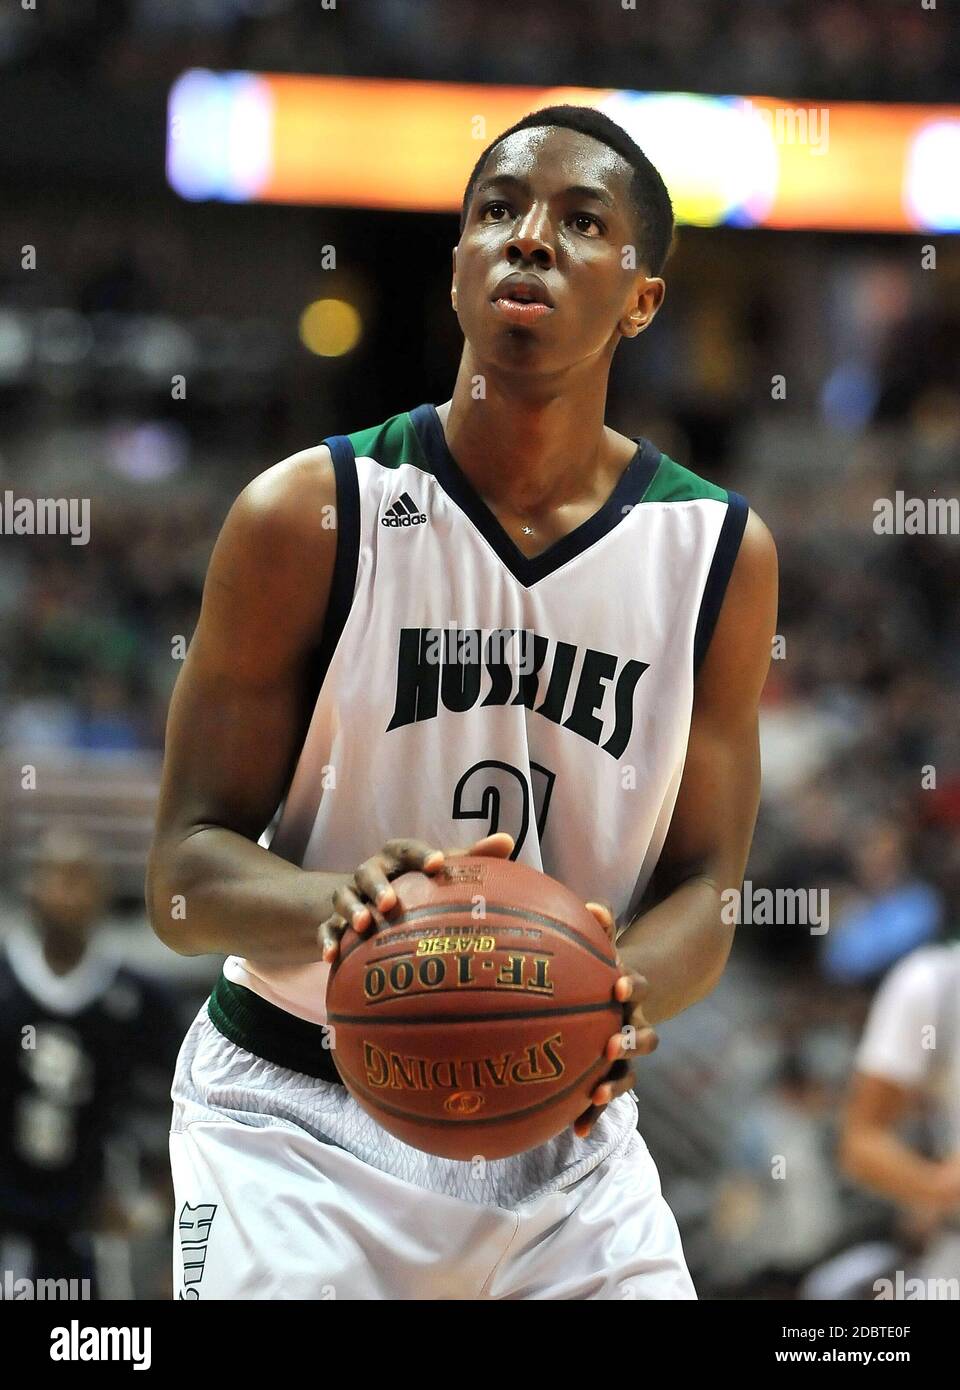 Anaheim, CA. 5th Mar, 2016. Onyeka Okongwu #21 in action during the CIF-SS Open division Final Boys Prep Basketball game.between Chino Hills and Sierra Canyon at the Honda Center in Anaheim California.Chino Hills defeats Sierra Canyon 105-83.Mandatory Photo Credit: Louis Lopez/Modern Exposure/Cal Sport Media/Alamy Live News Stock Photo